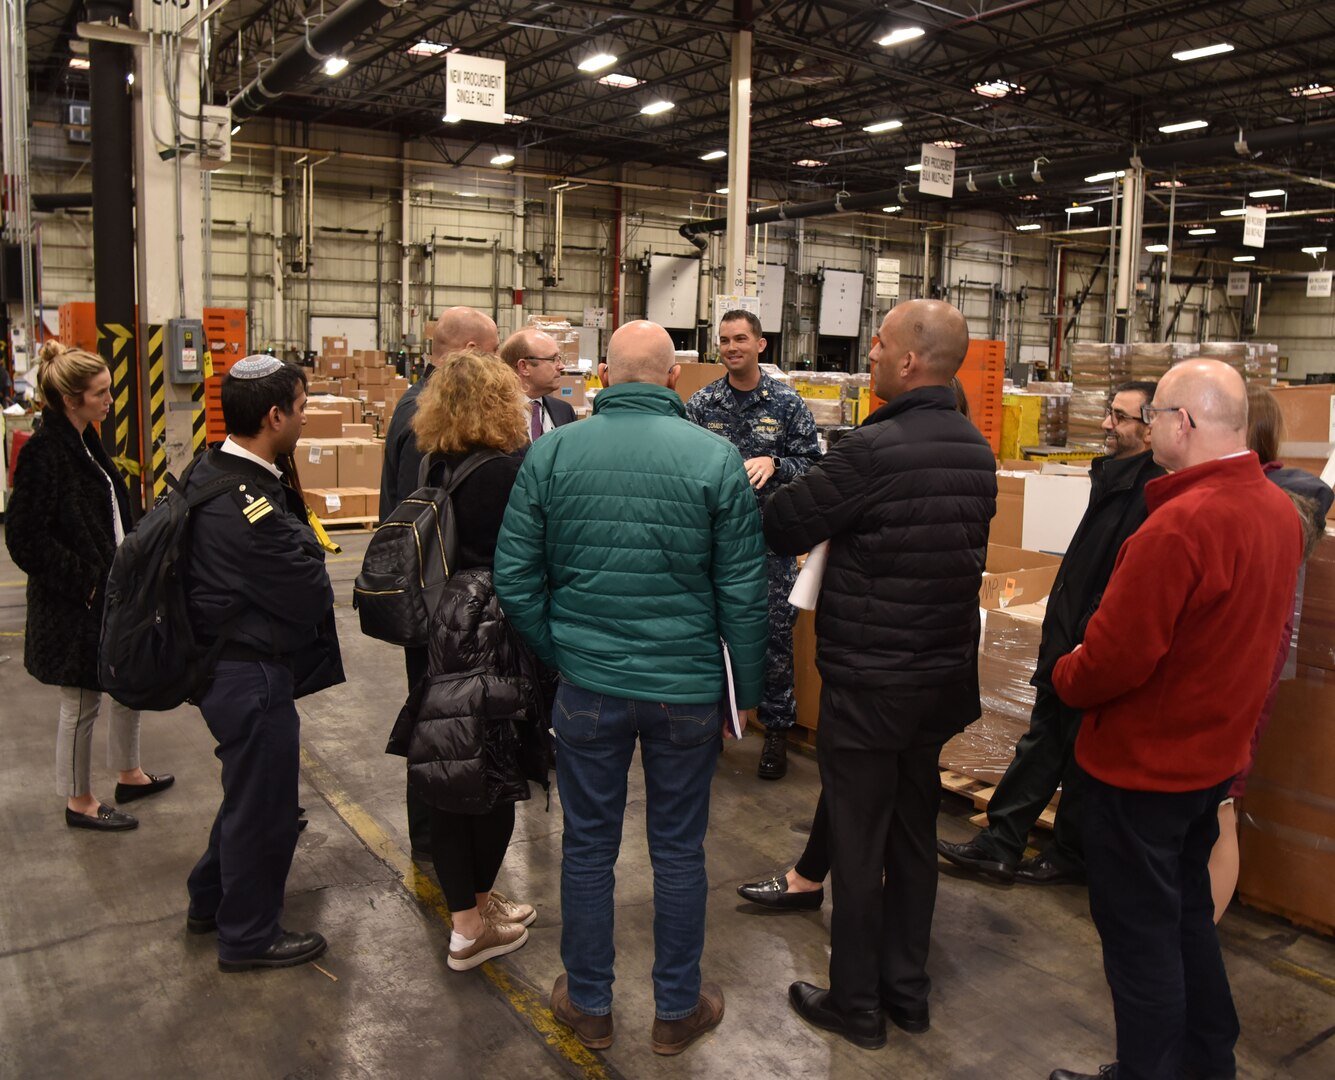 Navy LT Kyle Combs, operations officer, DLA Distribution Management Division, answers questions while the Israel Security Assistance Liaison Officers receive a tour through the DLA Eastern Distribution Center.